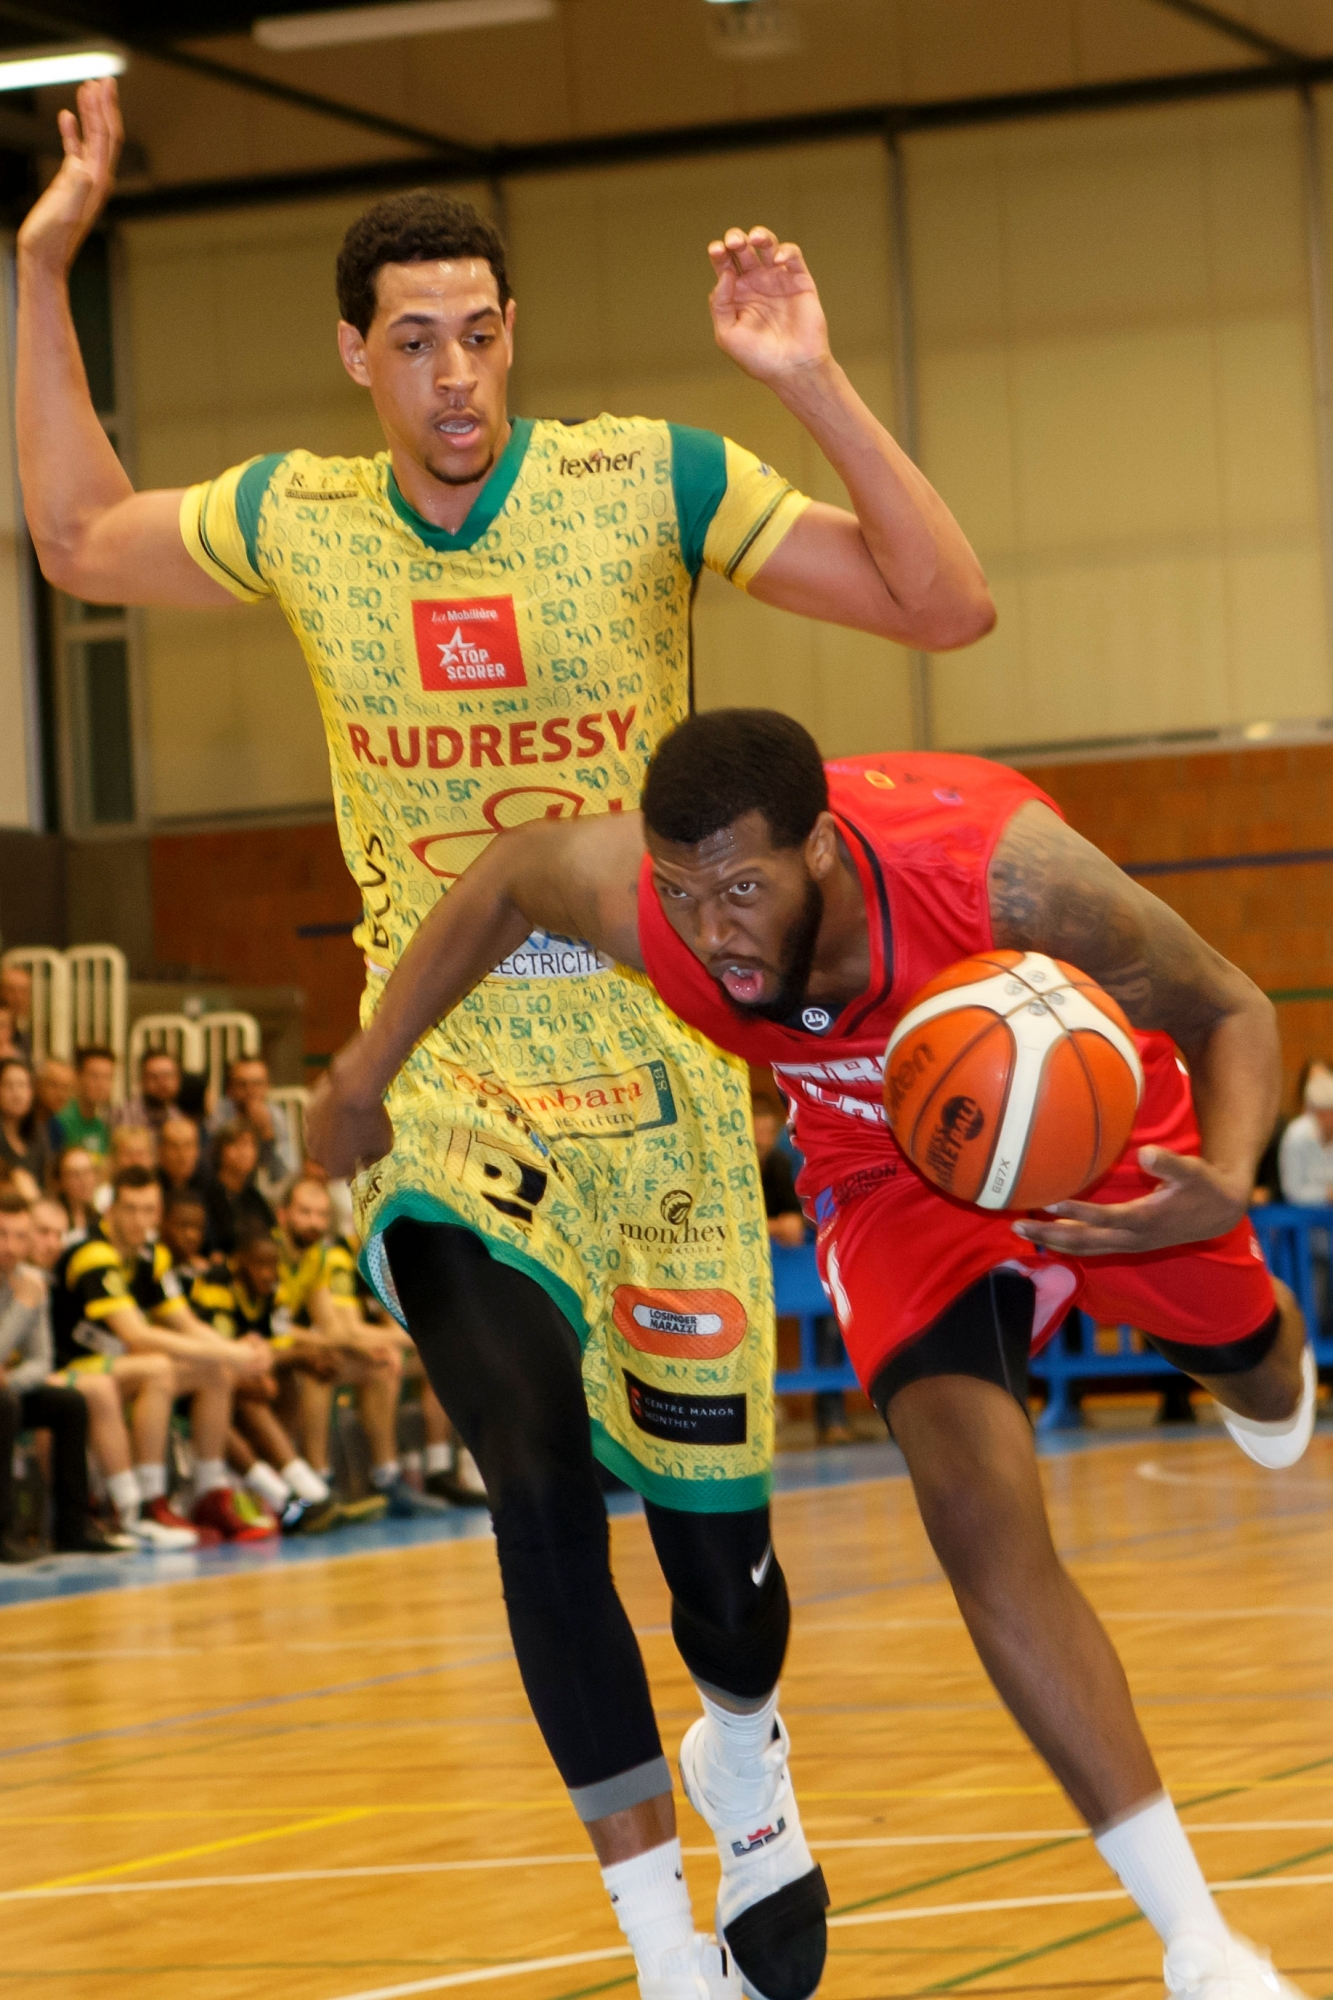 Lausanne's Anton Wilson, right, drives to the basket past Monthey's Jordan Heath, left, during the first leg of the playoffs quarter final game of National League A of Swiss basketball Championship between BBC Monthey and BBC Lausanne, at the sports hall salle du Reposieux in Monthey, Switzerland, Friday, April 28, 2017. (KEYSTONE/Salvatore Di Nolfi) SWITZERLAND BASKETBALL PLAYOFF MONTHEY LAUSANNE